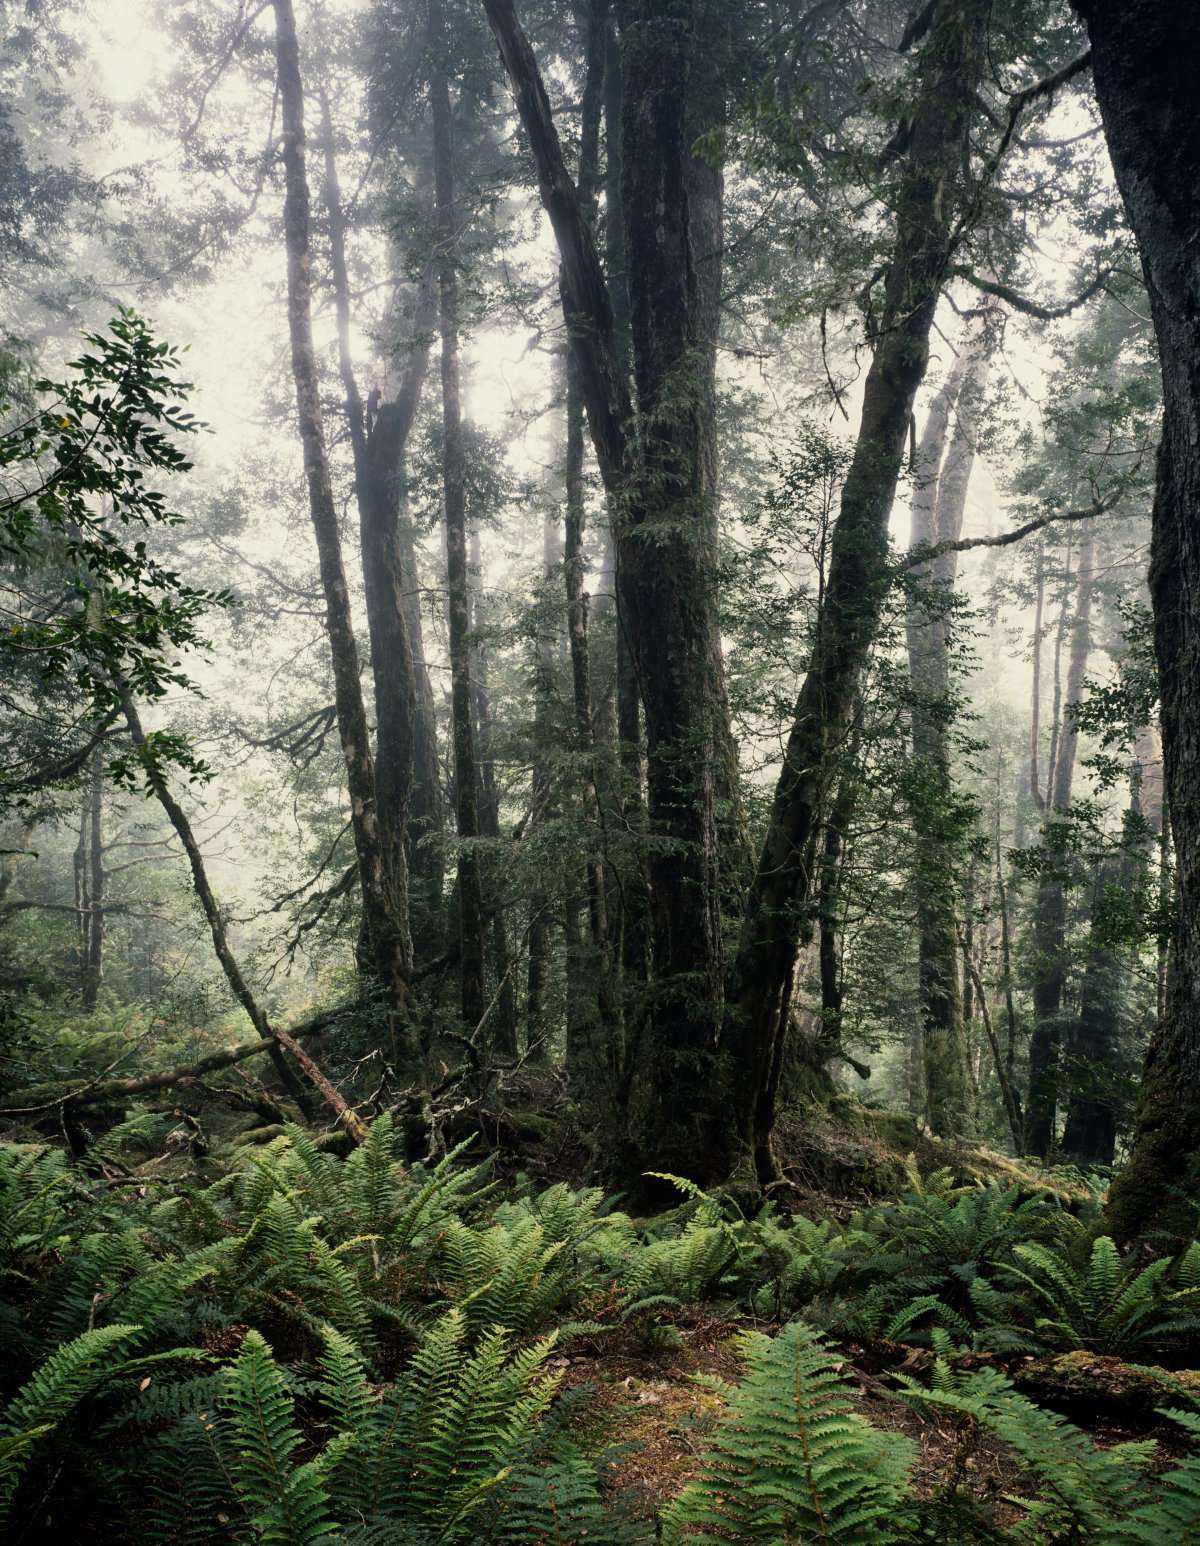 A misty forest scene. Many small ferns litter the floor of the forest with large trees growing up into the mist.